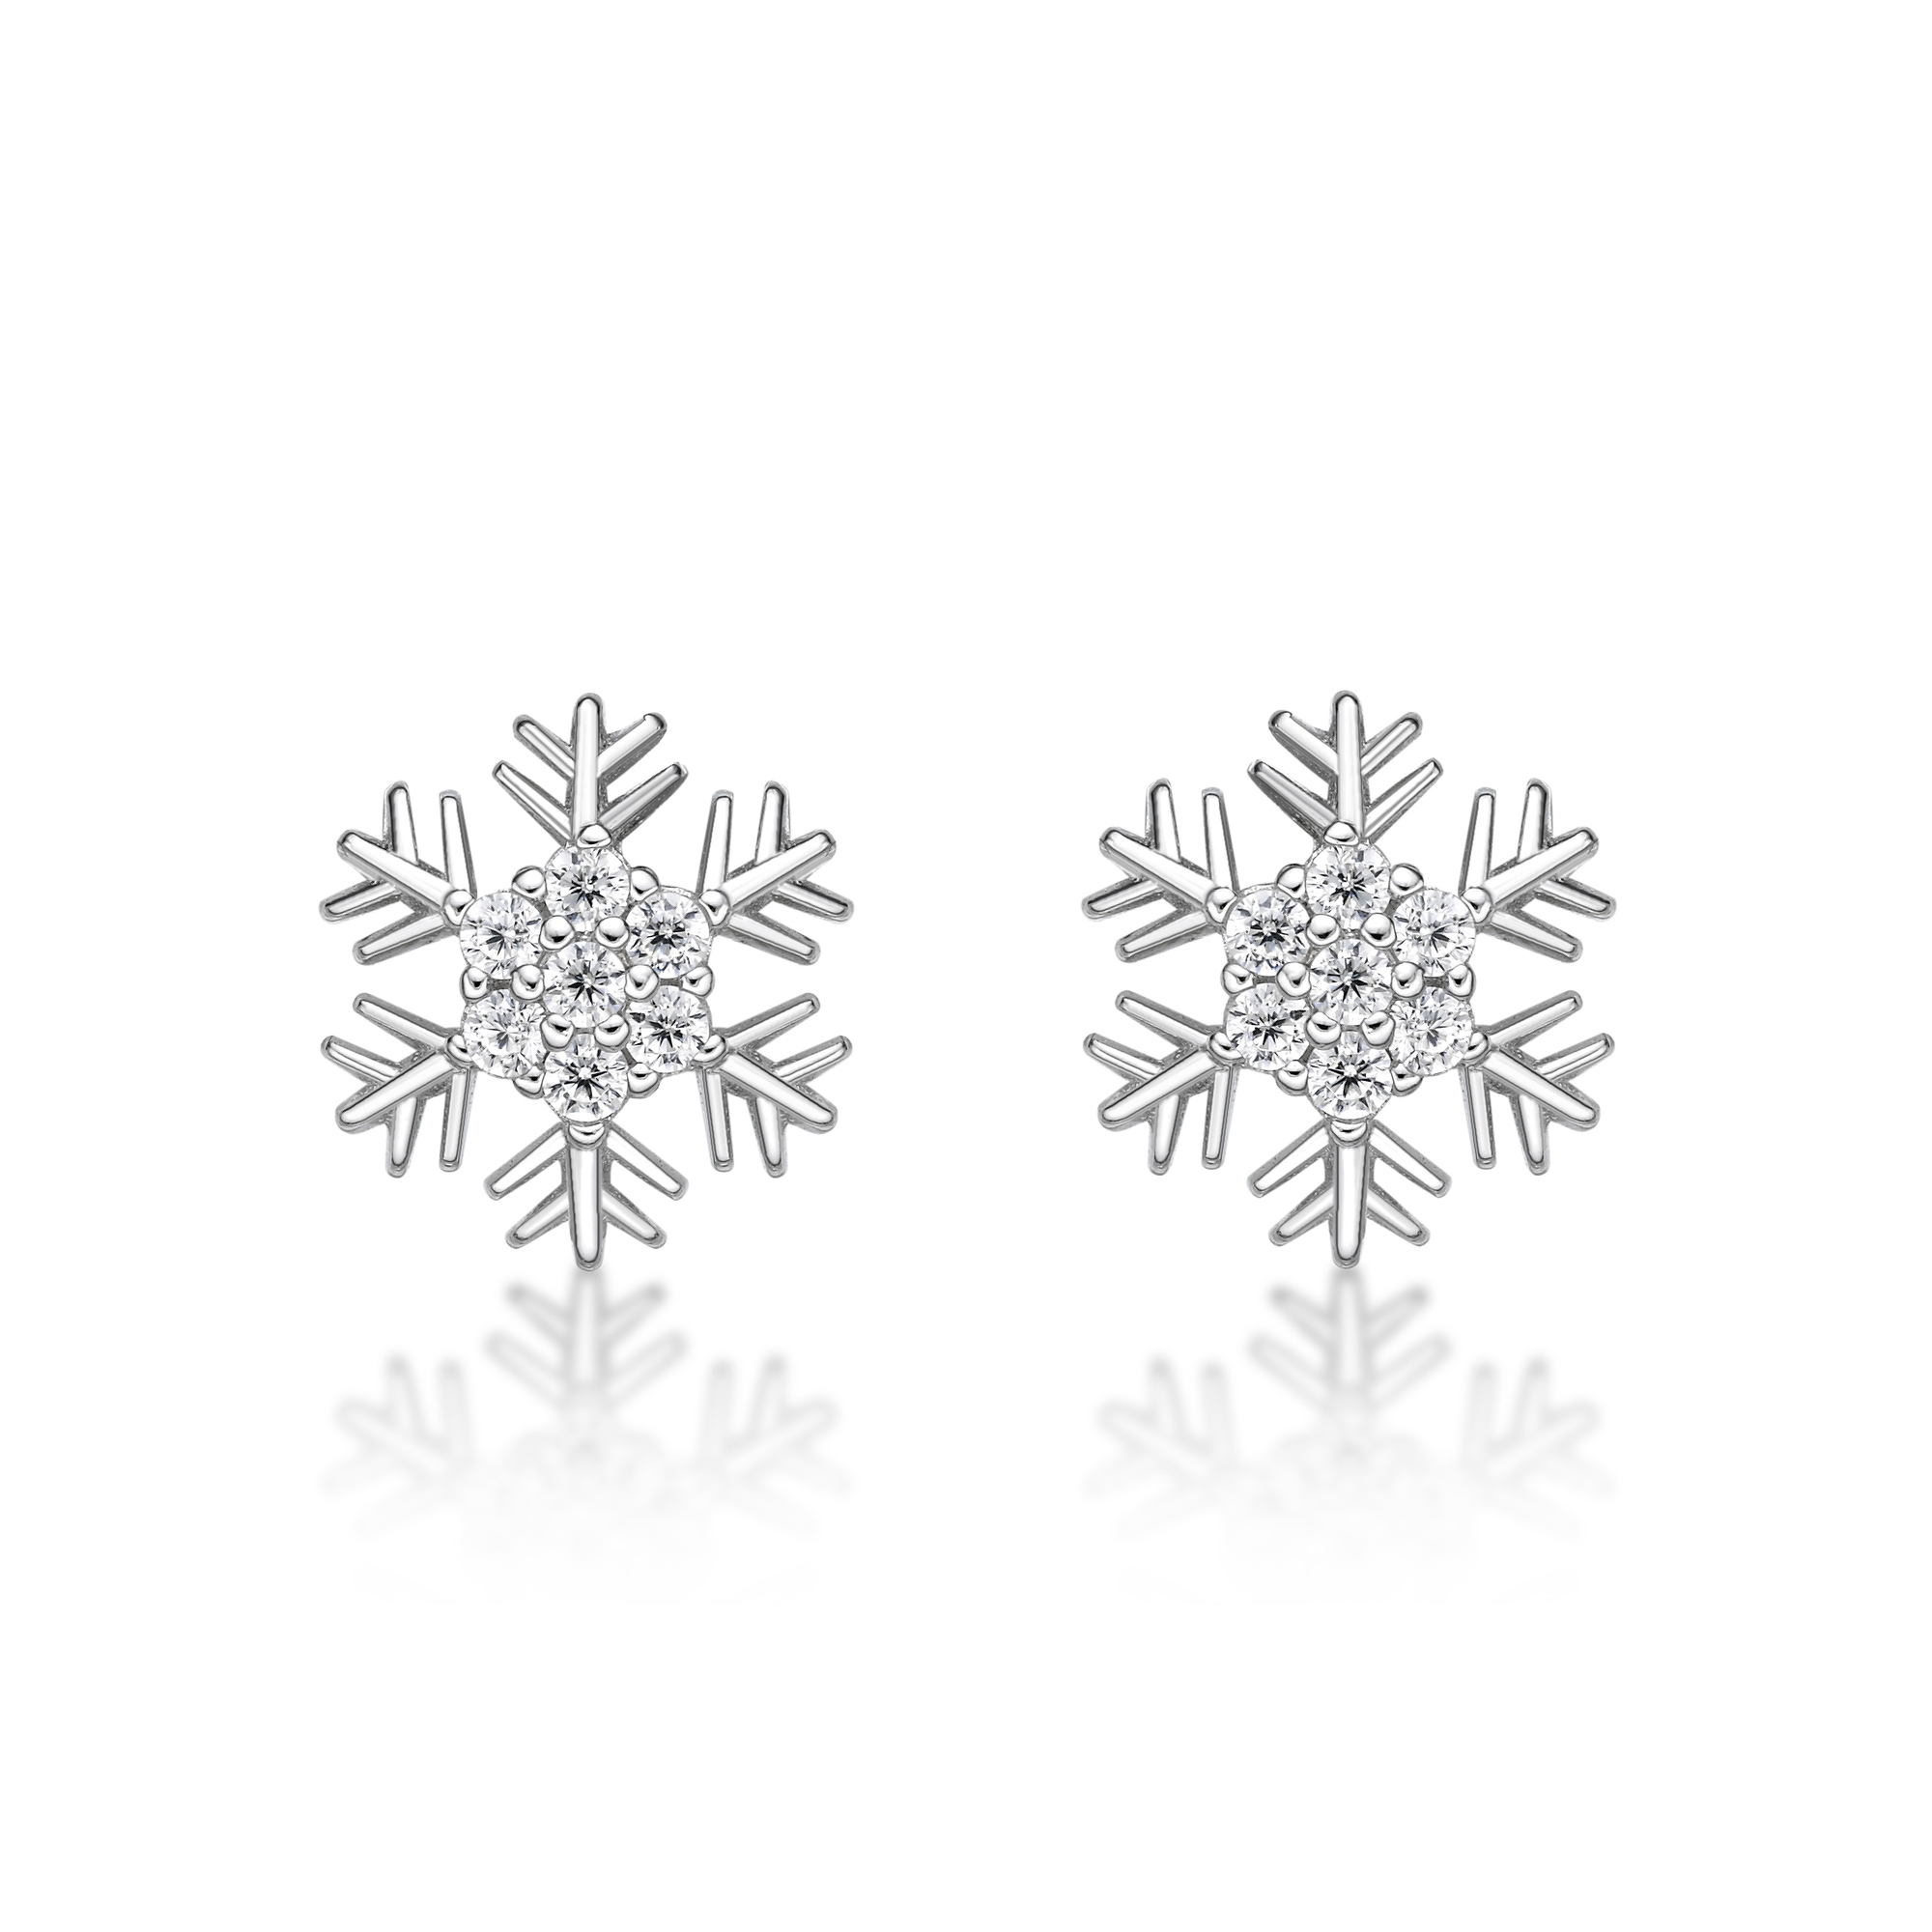 Lavari Jewelers Women's Snowflake Stud Earrings with Friction Back, 925 Sterling Silver, Cubic Zirconia, 10 MM